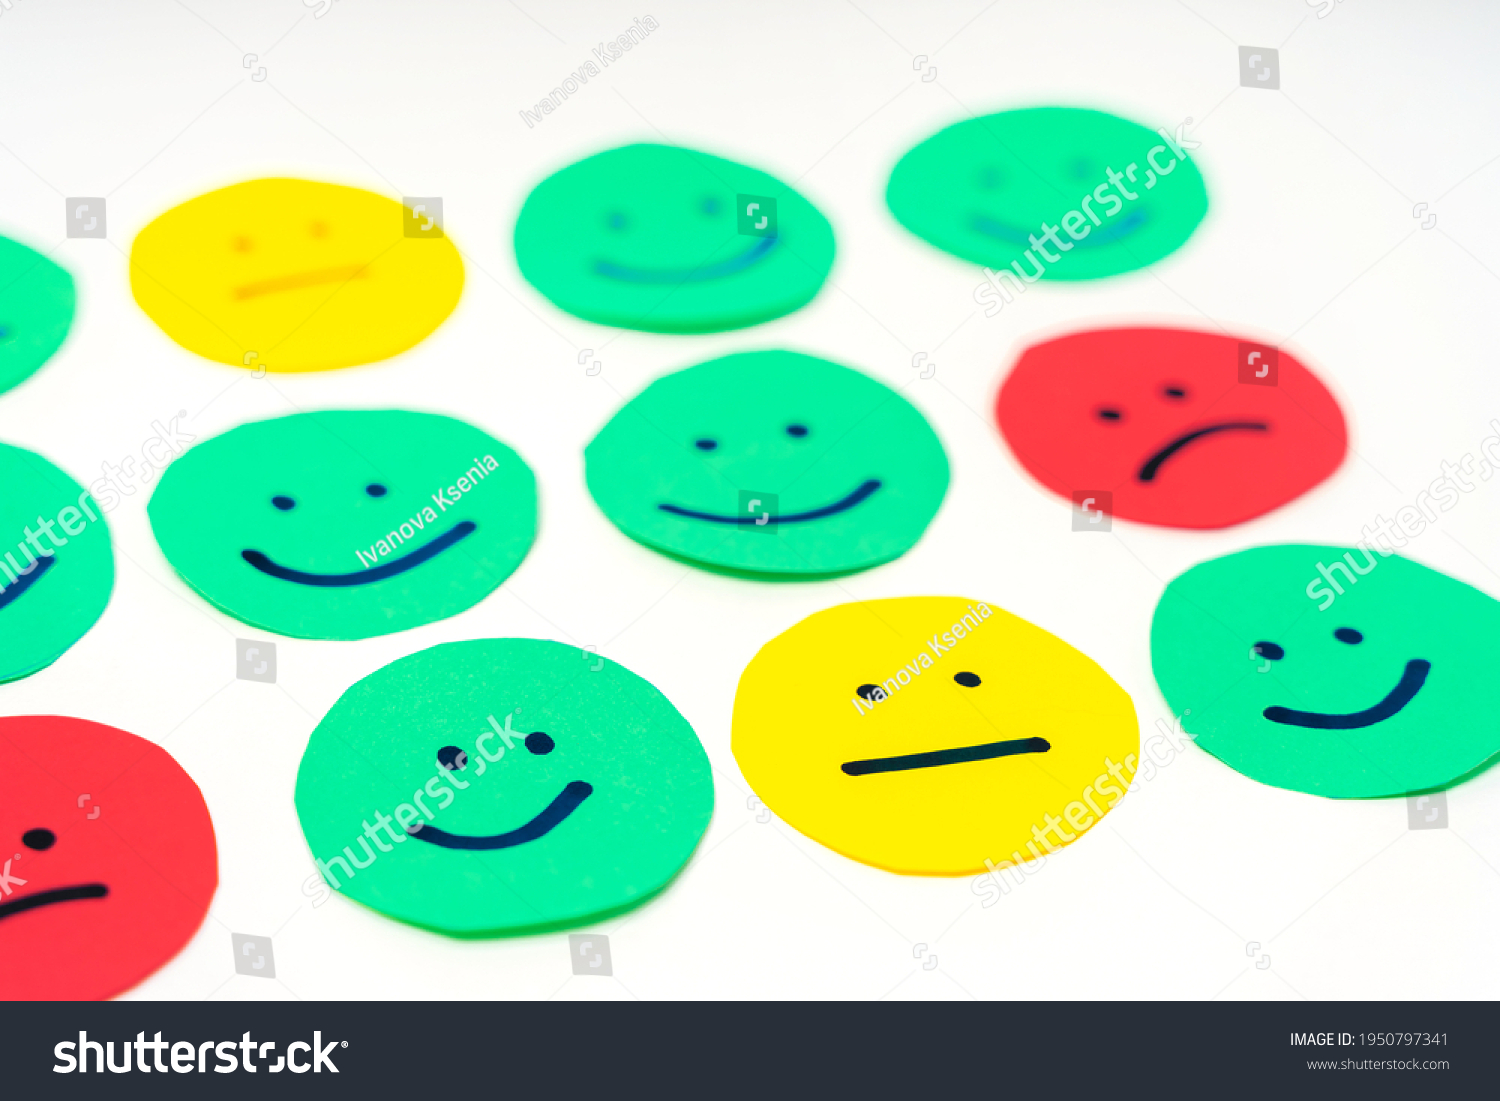 Feedback in the form of faces with emotions of different colors. The concept of a rating scale or sentiment scale #1950797341